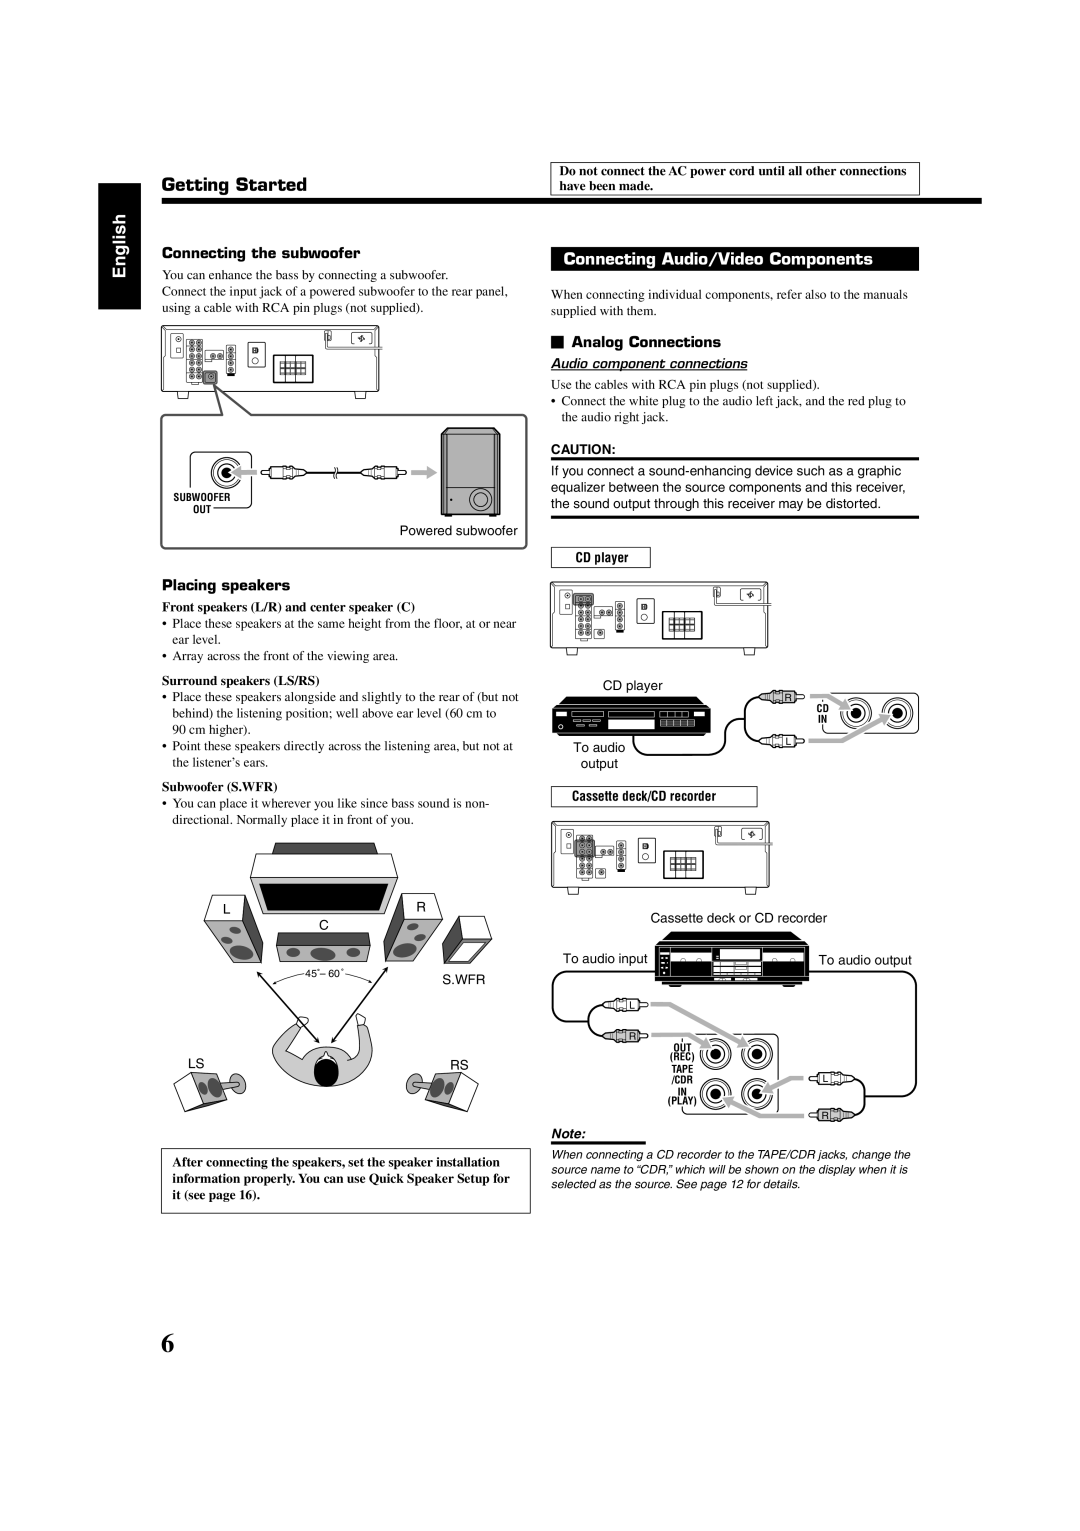 JVC LVT1507-012A manual Getting Started, Connecting Audio/Video Components, English, Audio component connections 